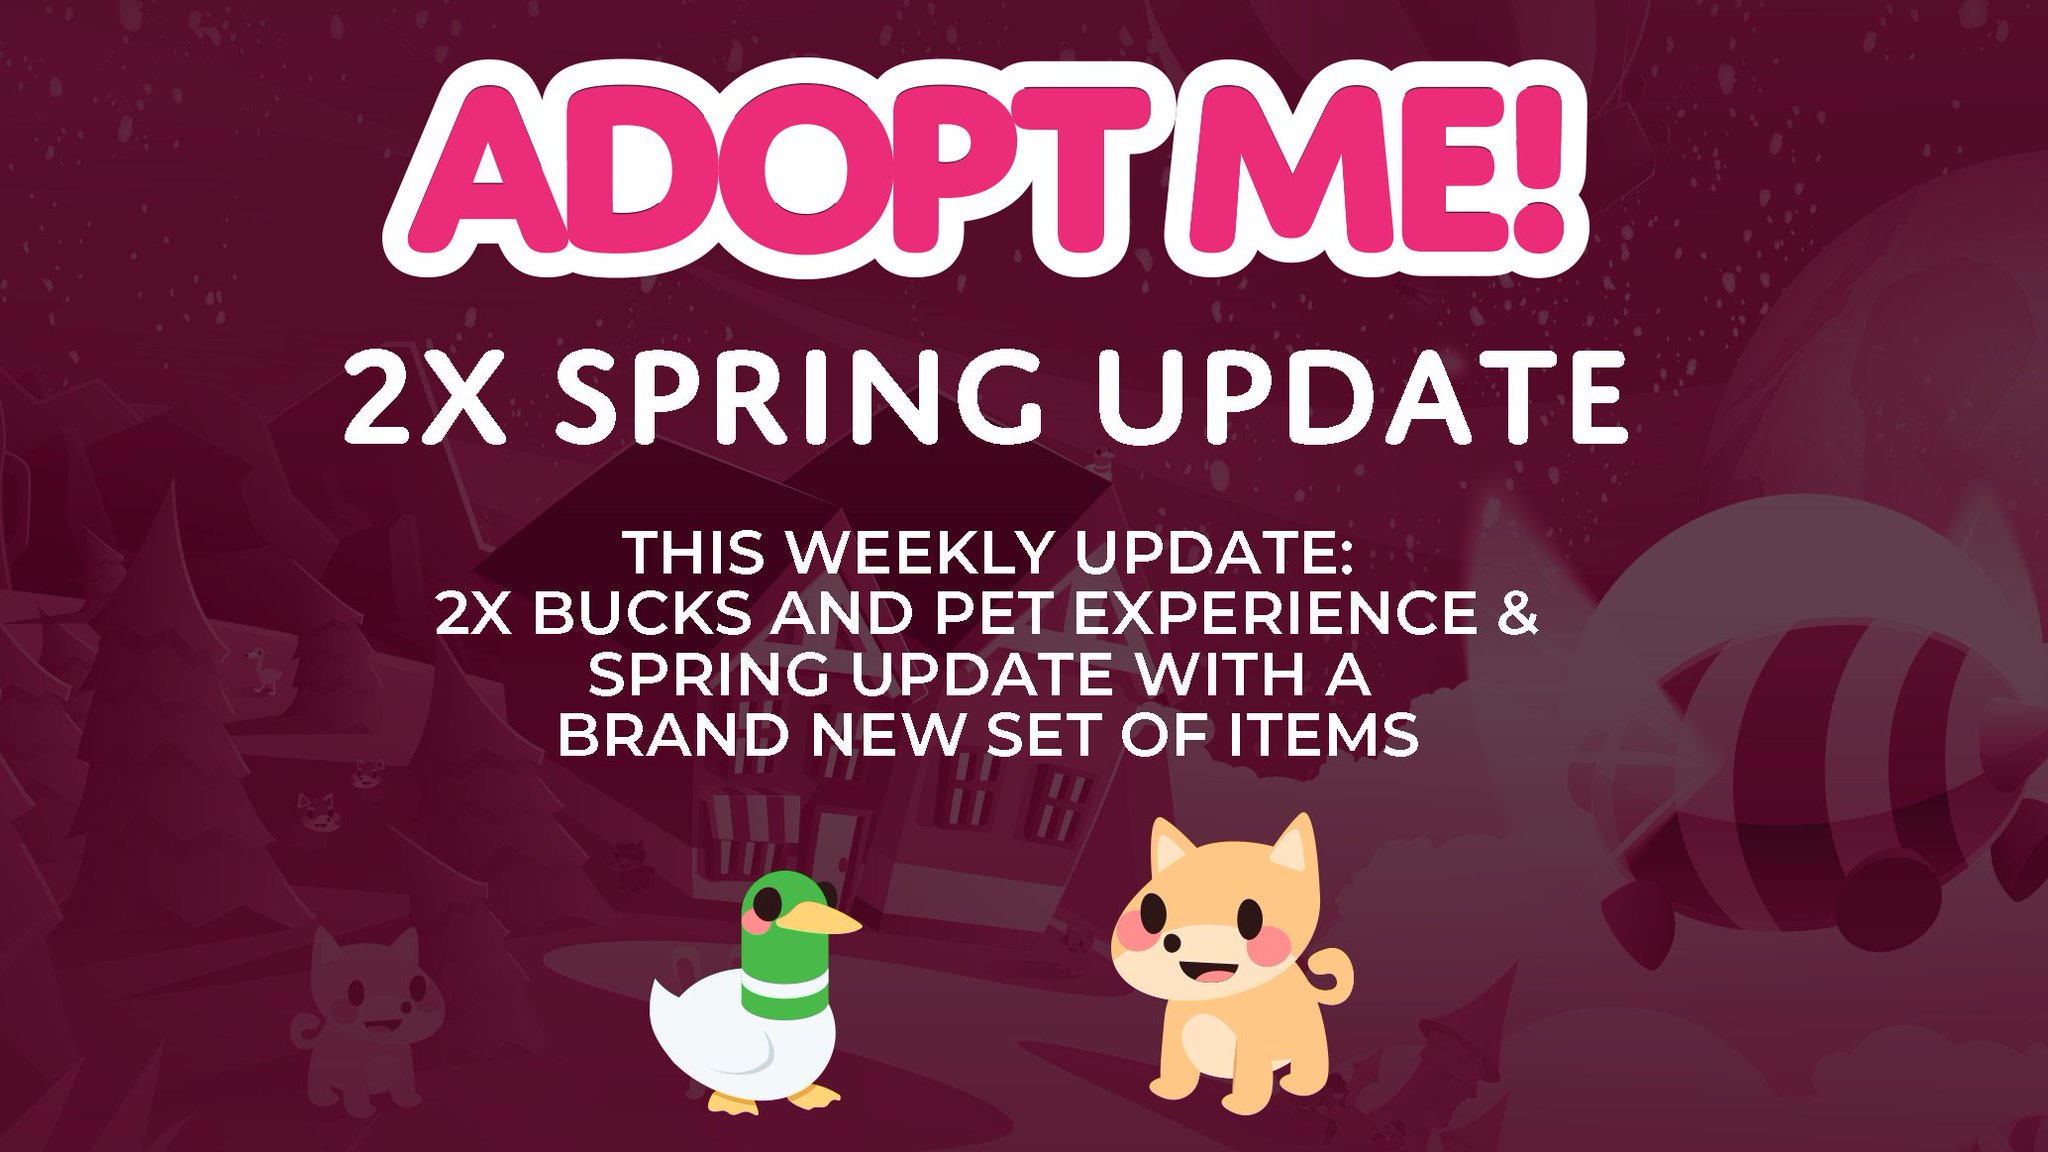 Adopt Me On Twitter This Weekly Update Will Be A 2x Bucks And Pet Experience Update It Will Also Be Tied To A Little Spring Update With A Fresh Set Of Items